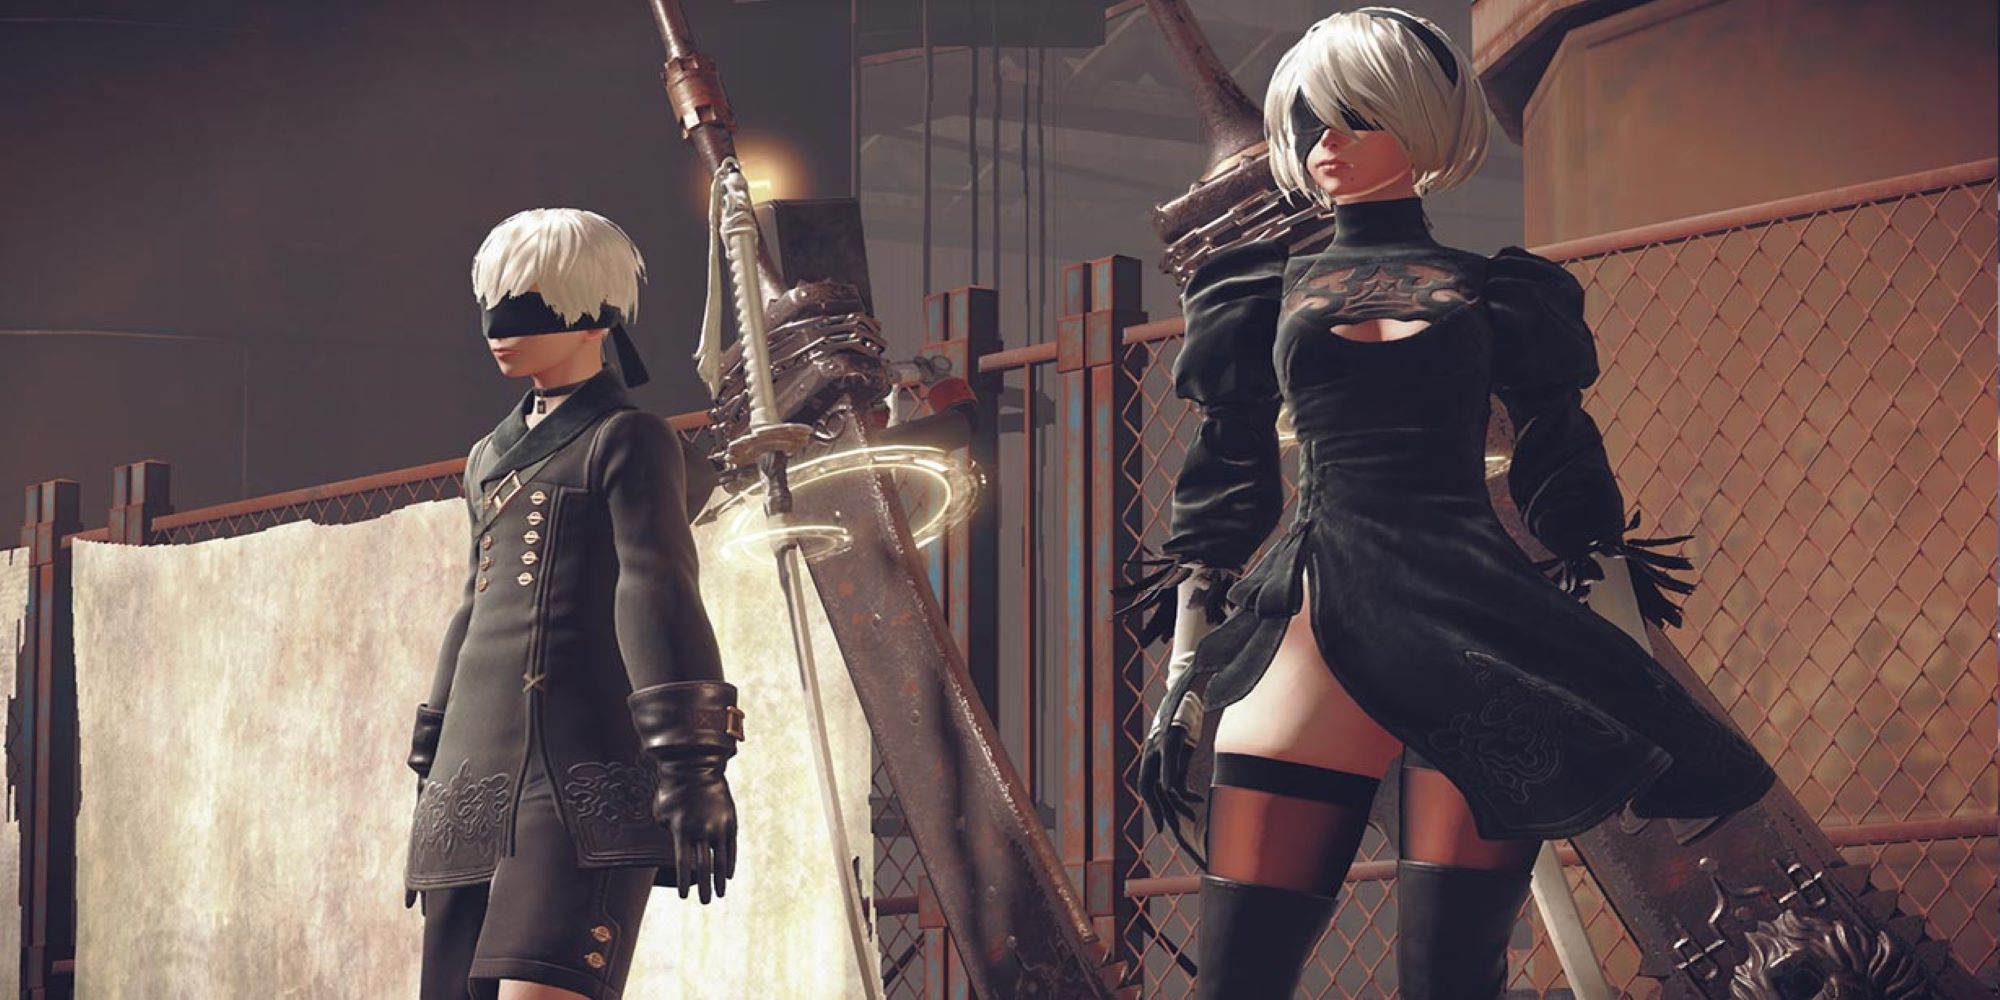 Nier Automata Screenshot of Two Protagonists Standing Side-By-Side